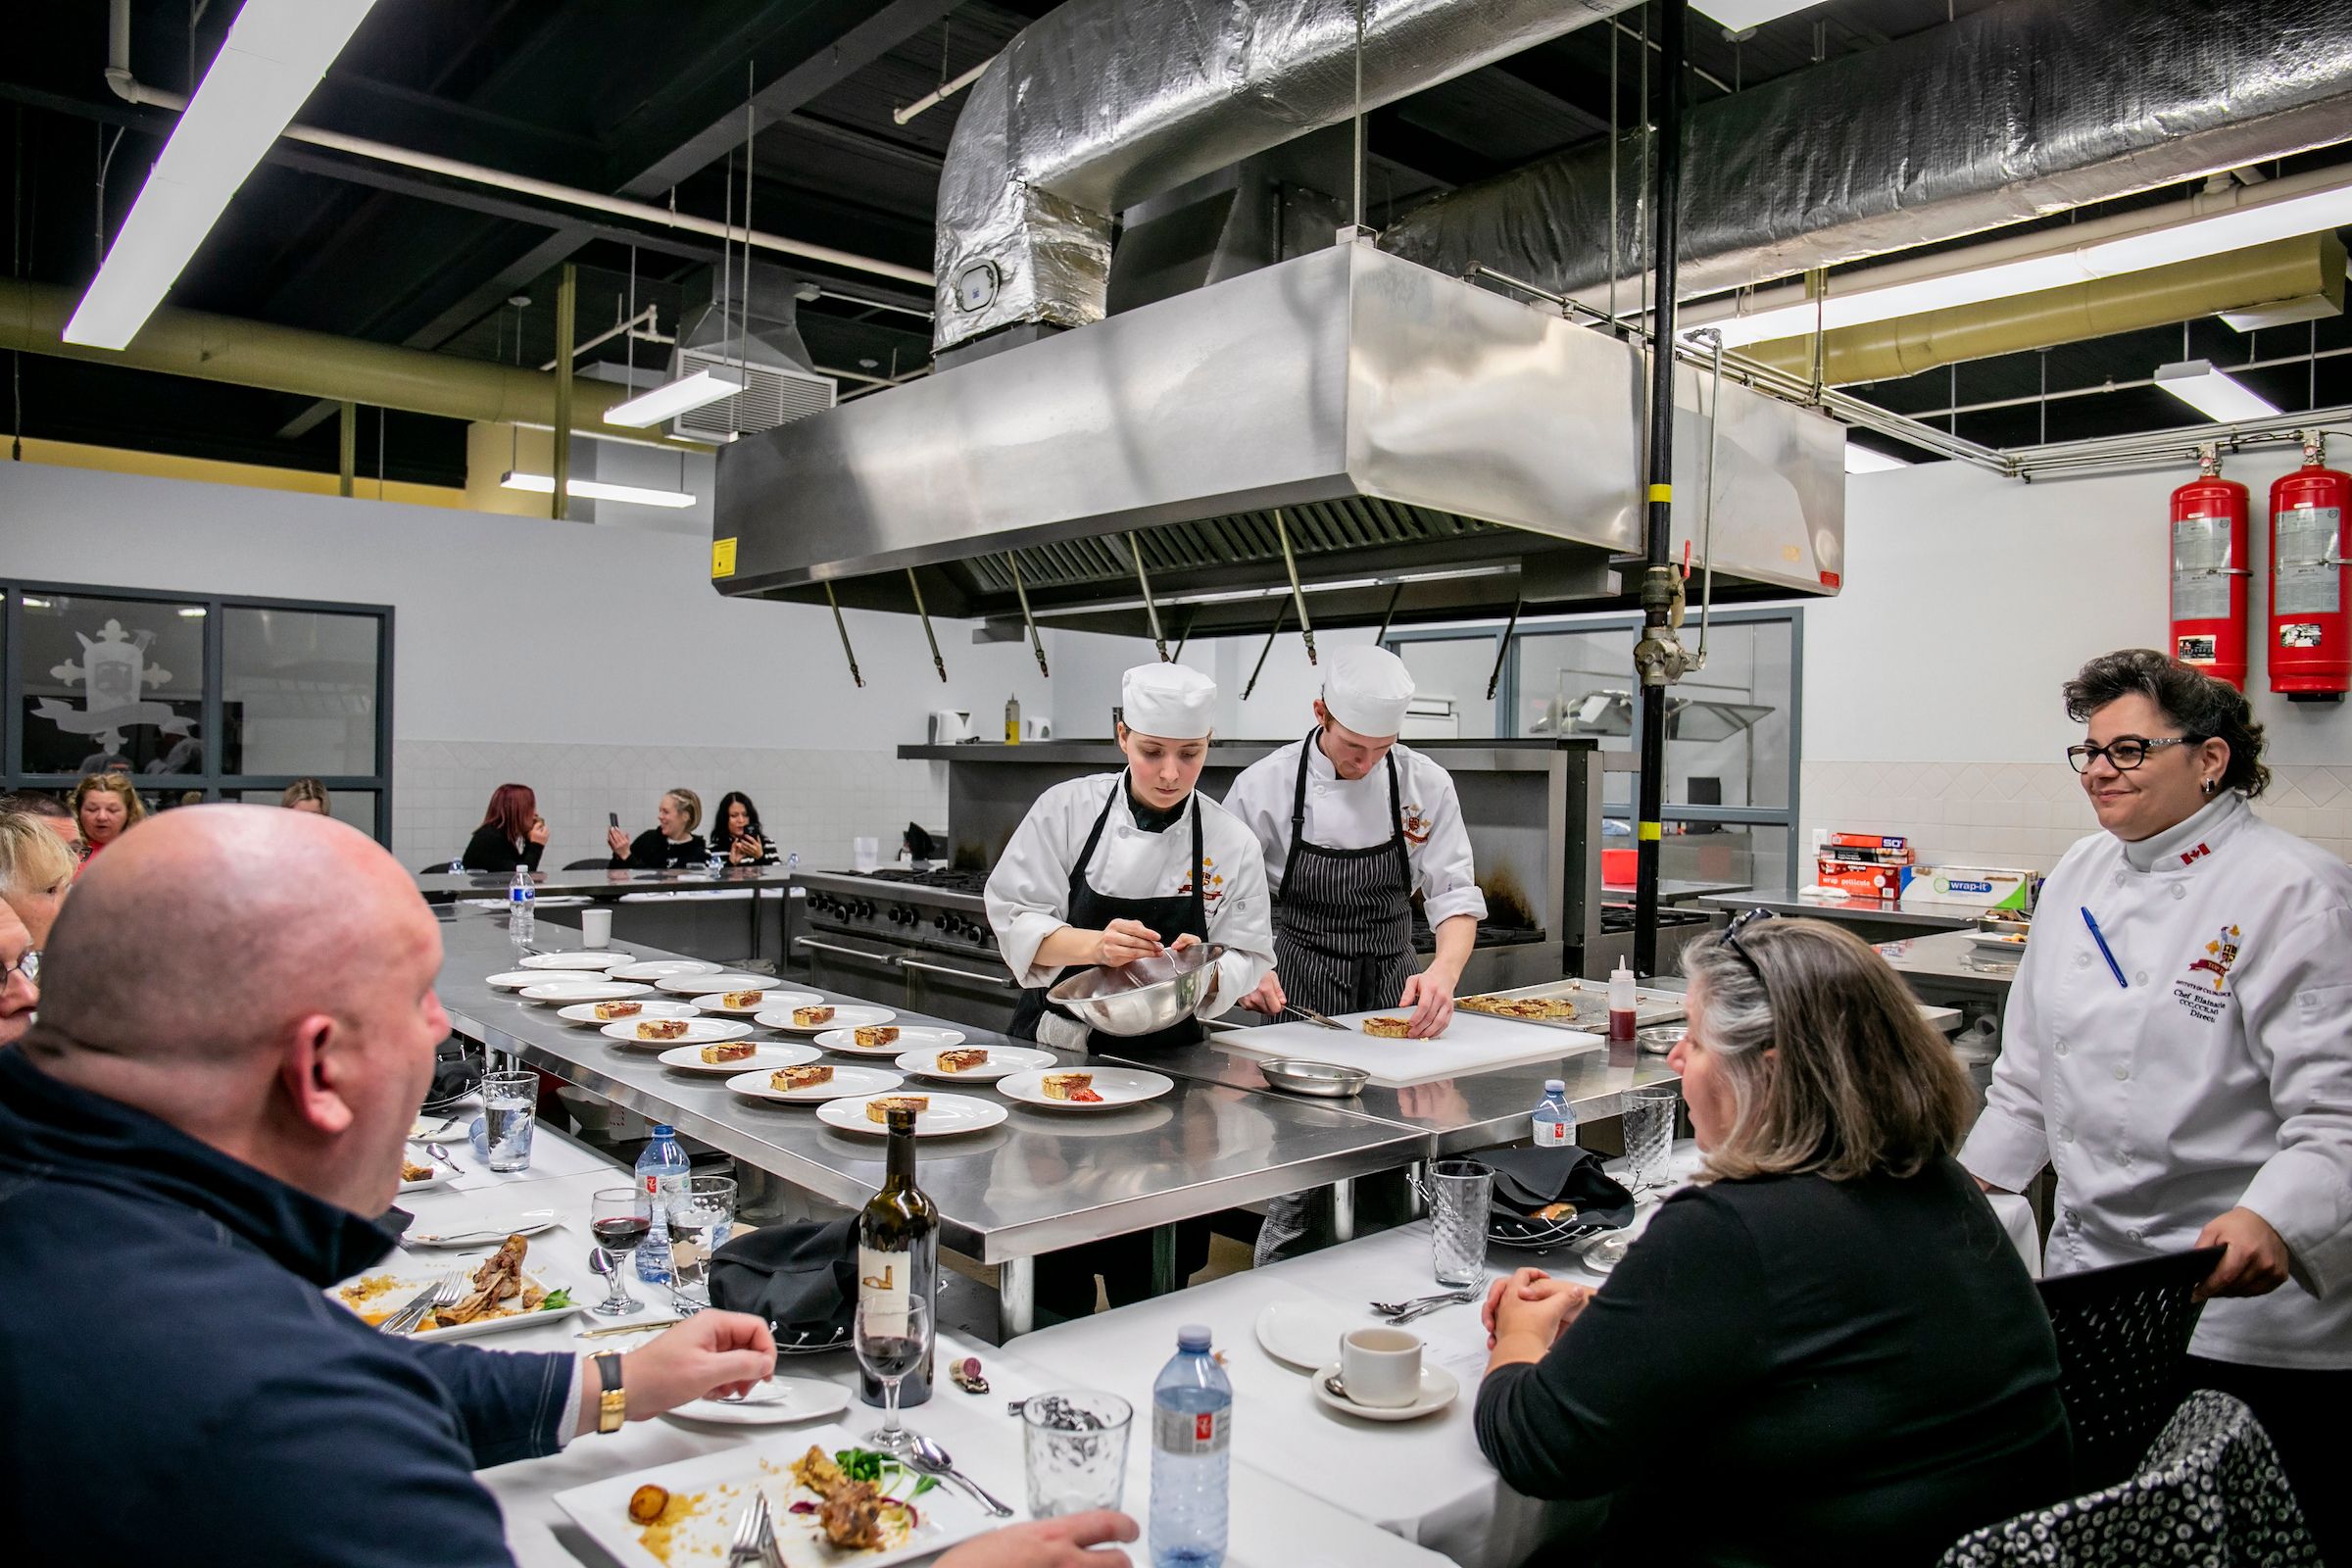 Collaborate Together with Team Building Events - Top Toques Institute of Culinary Excellence